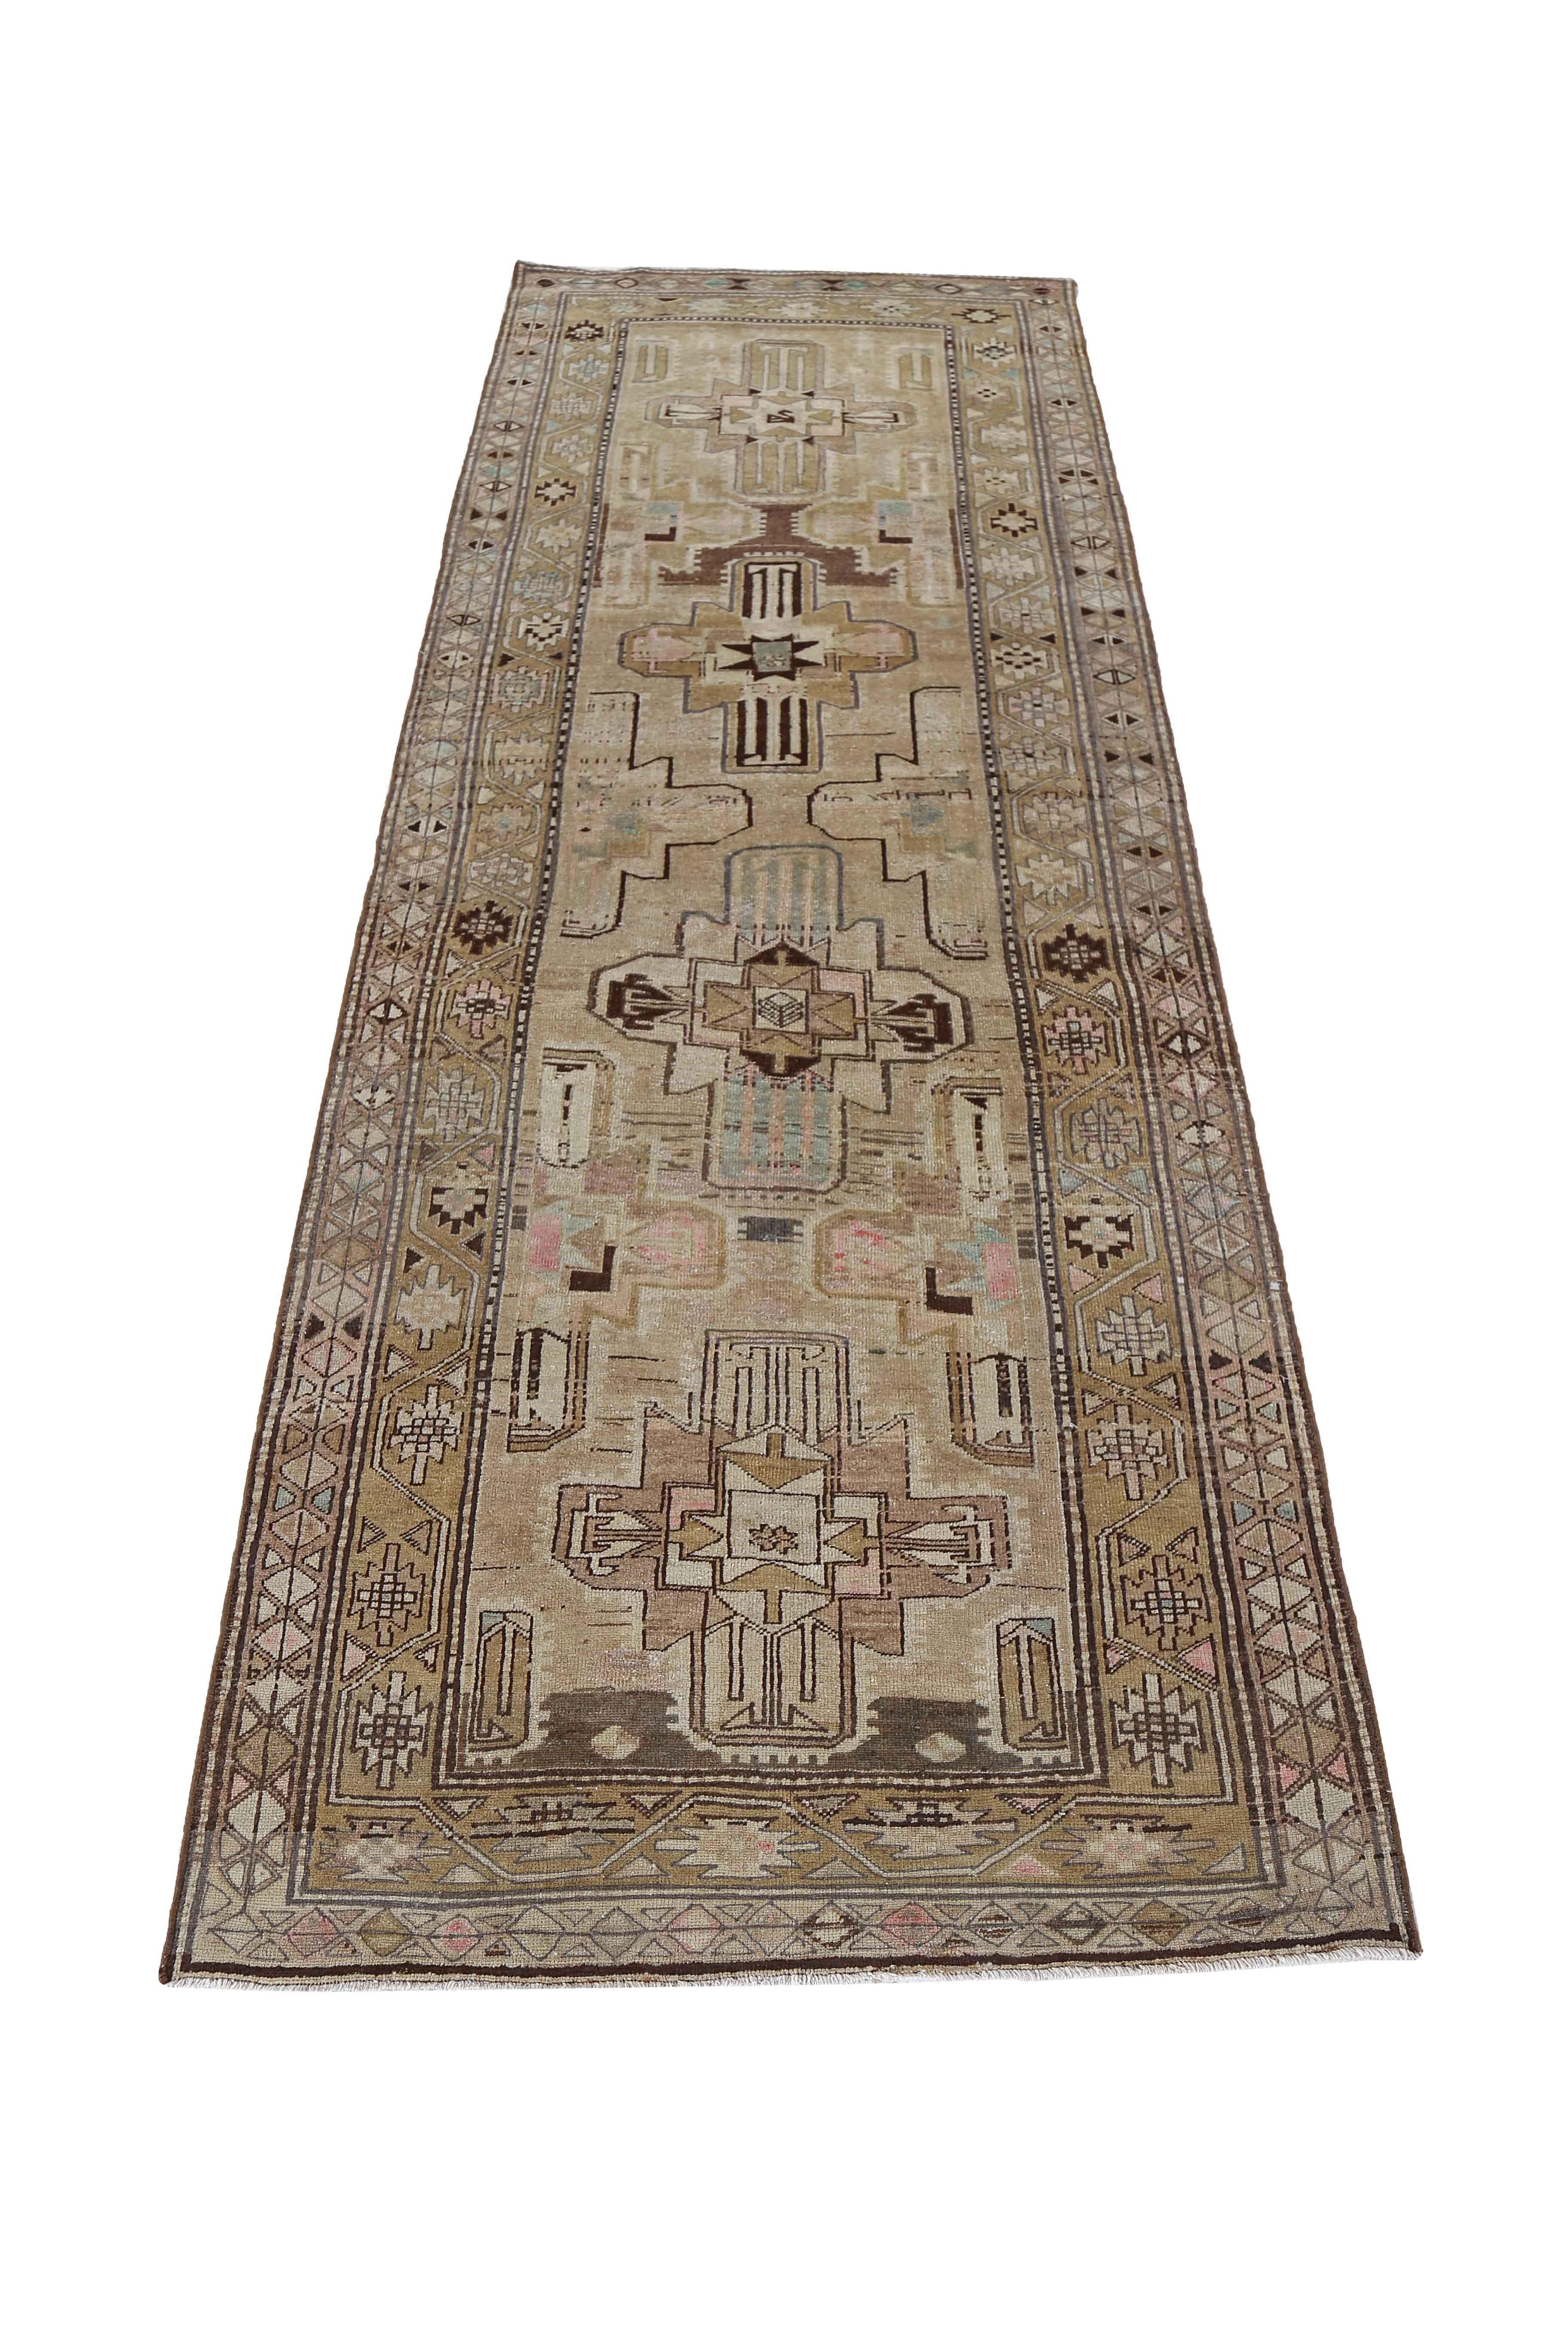 Antique Persian area rug handwoven from the finest sheep’s wool. It’s colored with all-natural vegetable dyes that are safe for humans and pets. It’s a traditional Azerbaijan design handwoven by expert artisans. It’s a lovely area rug that can be